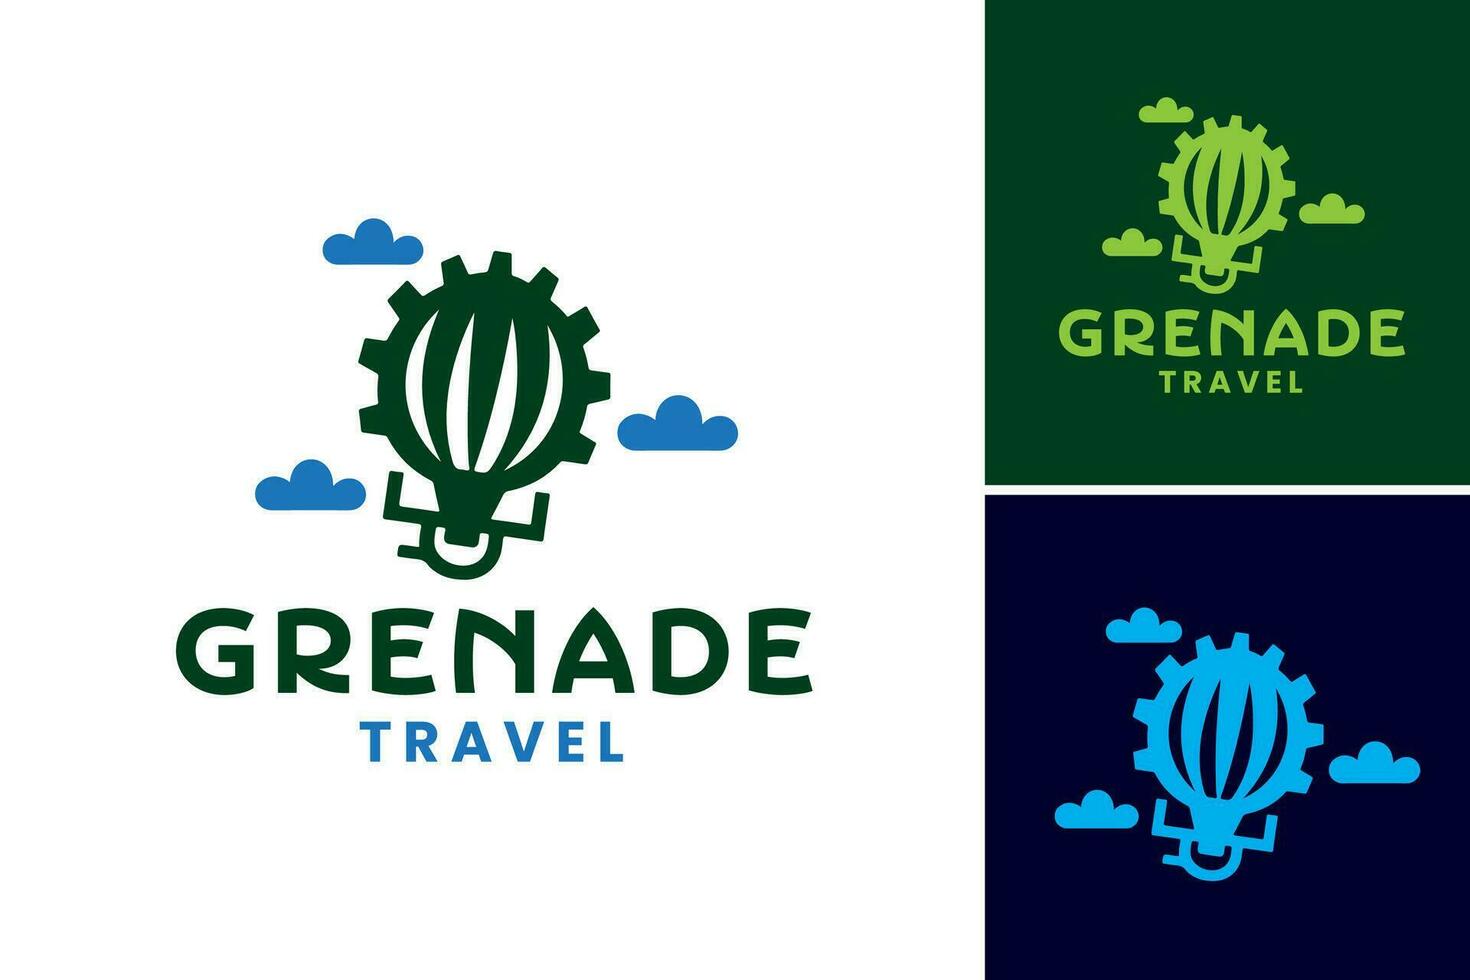 grenade travel logo is a design asset suitable for a travel-related business or brand. It features a green grenade-shaped symbol, representing dynamic and adventurous travel experiences. vector